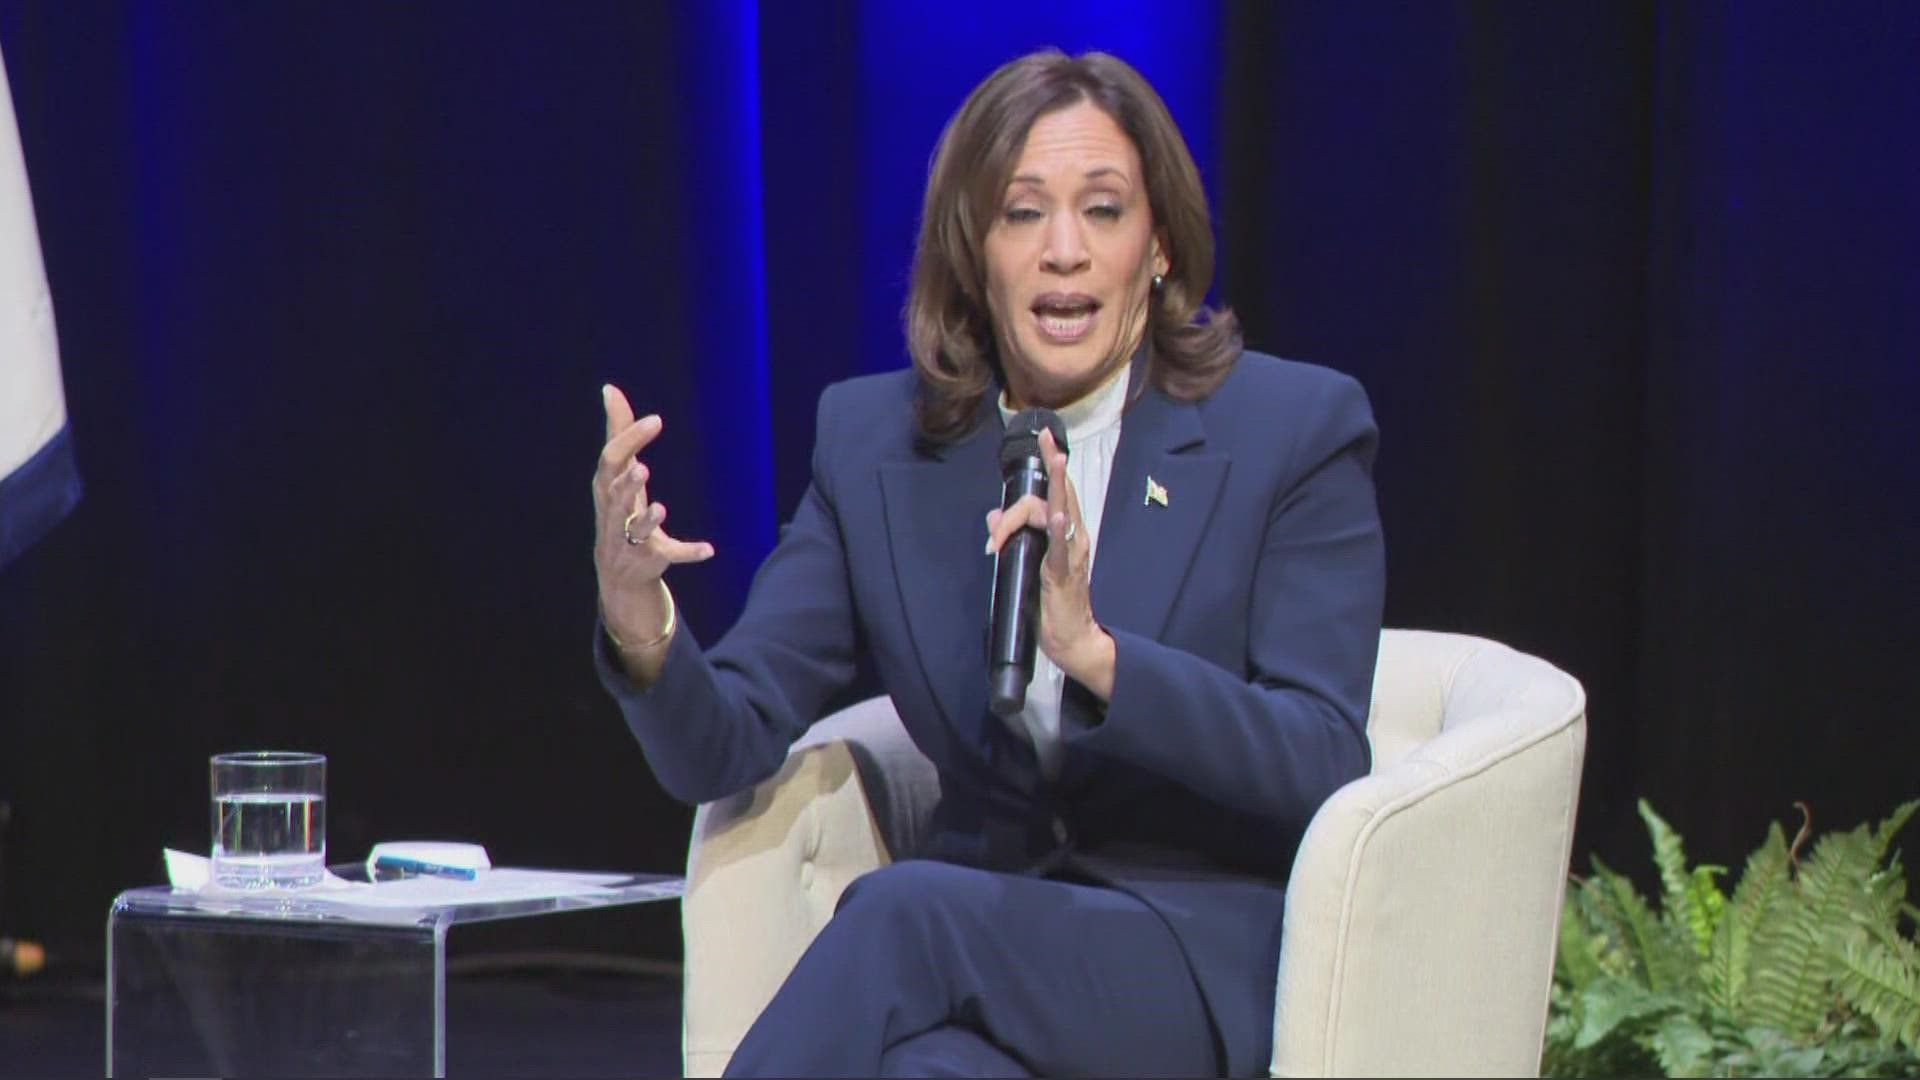 Vice President Kamala Harris returned to Atlanta today. She spoke just one day after the President's State of the Union address.